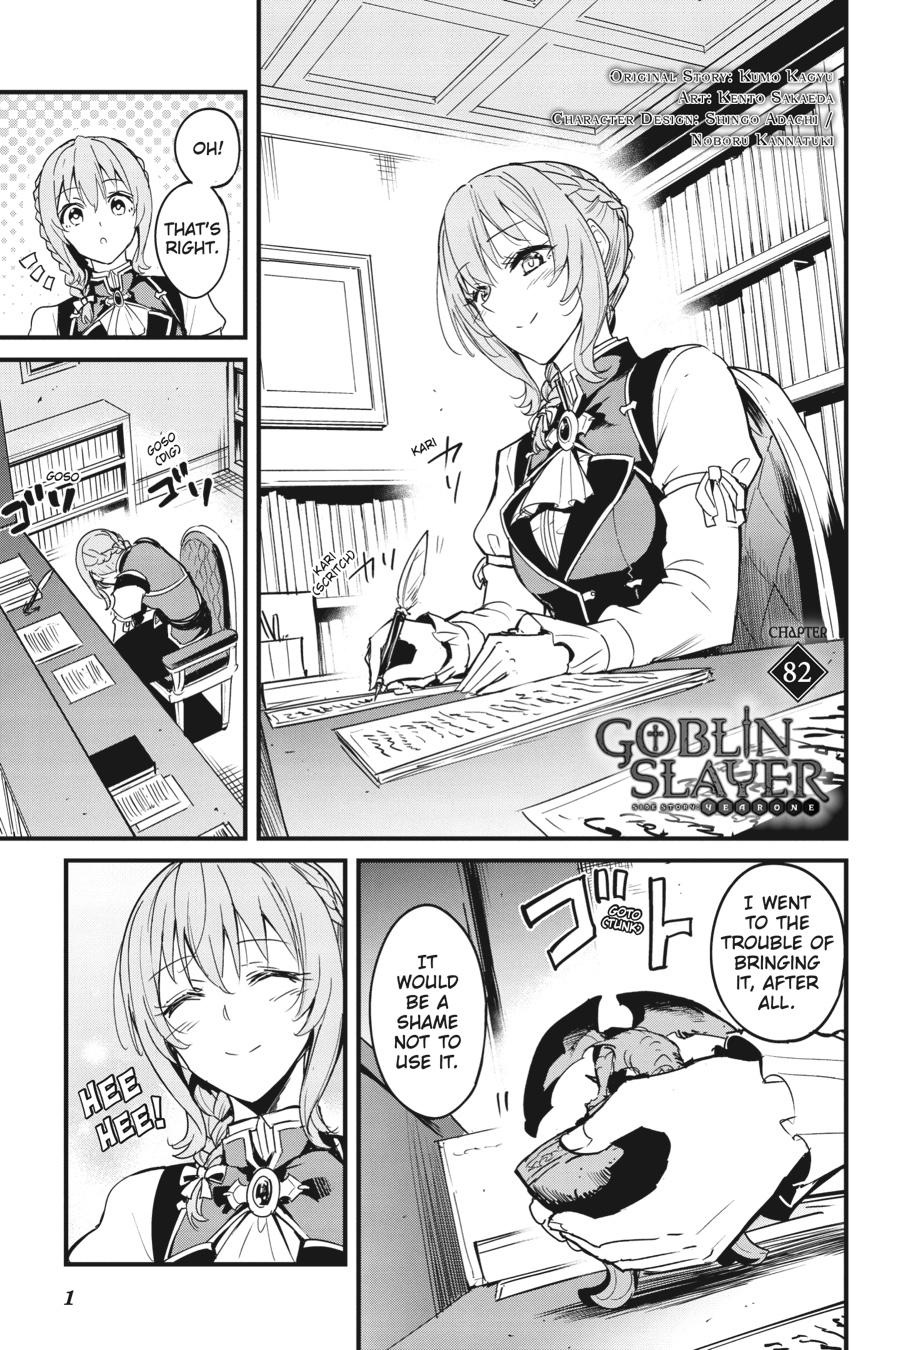 Goblin Slayer: Side Story Year One - Page 3